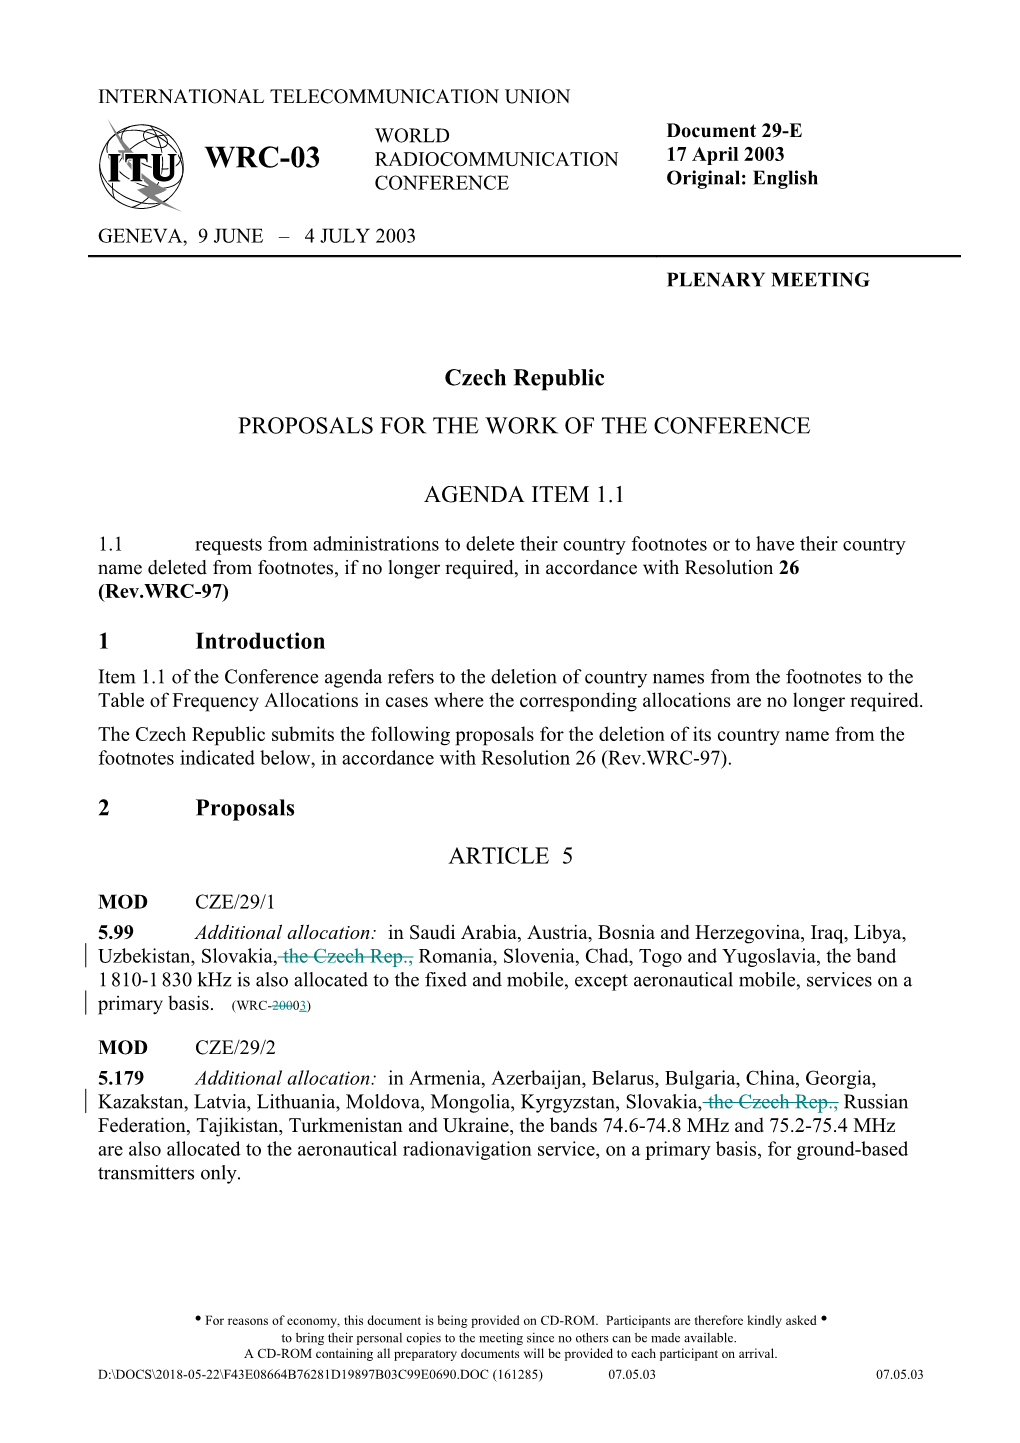 Proposals for the Work of the Conference: Agenda Item 1.1